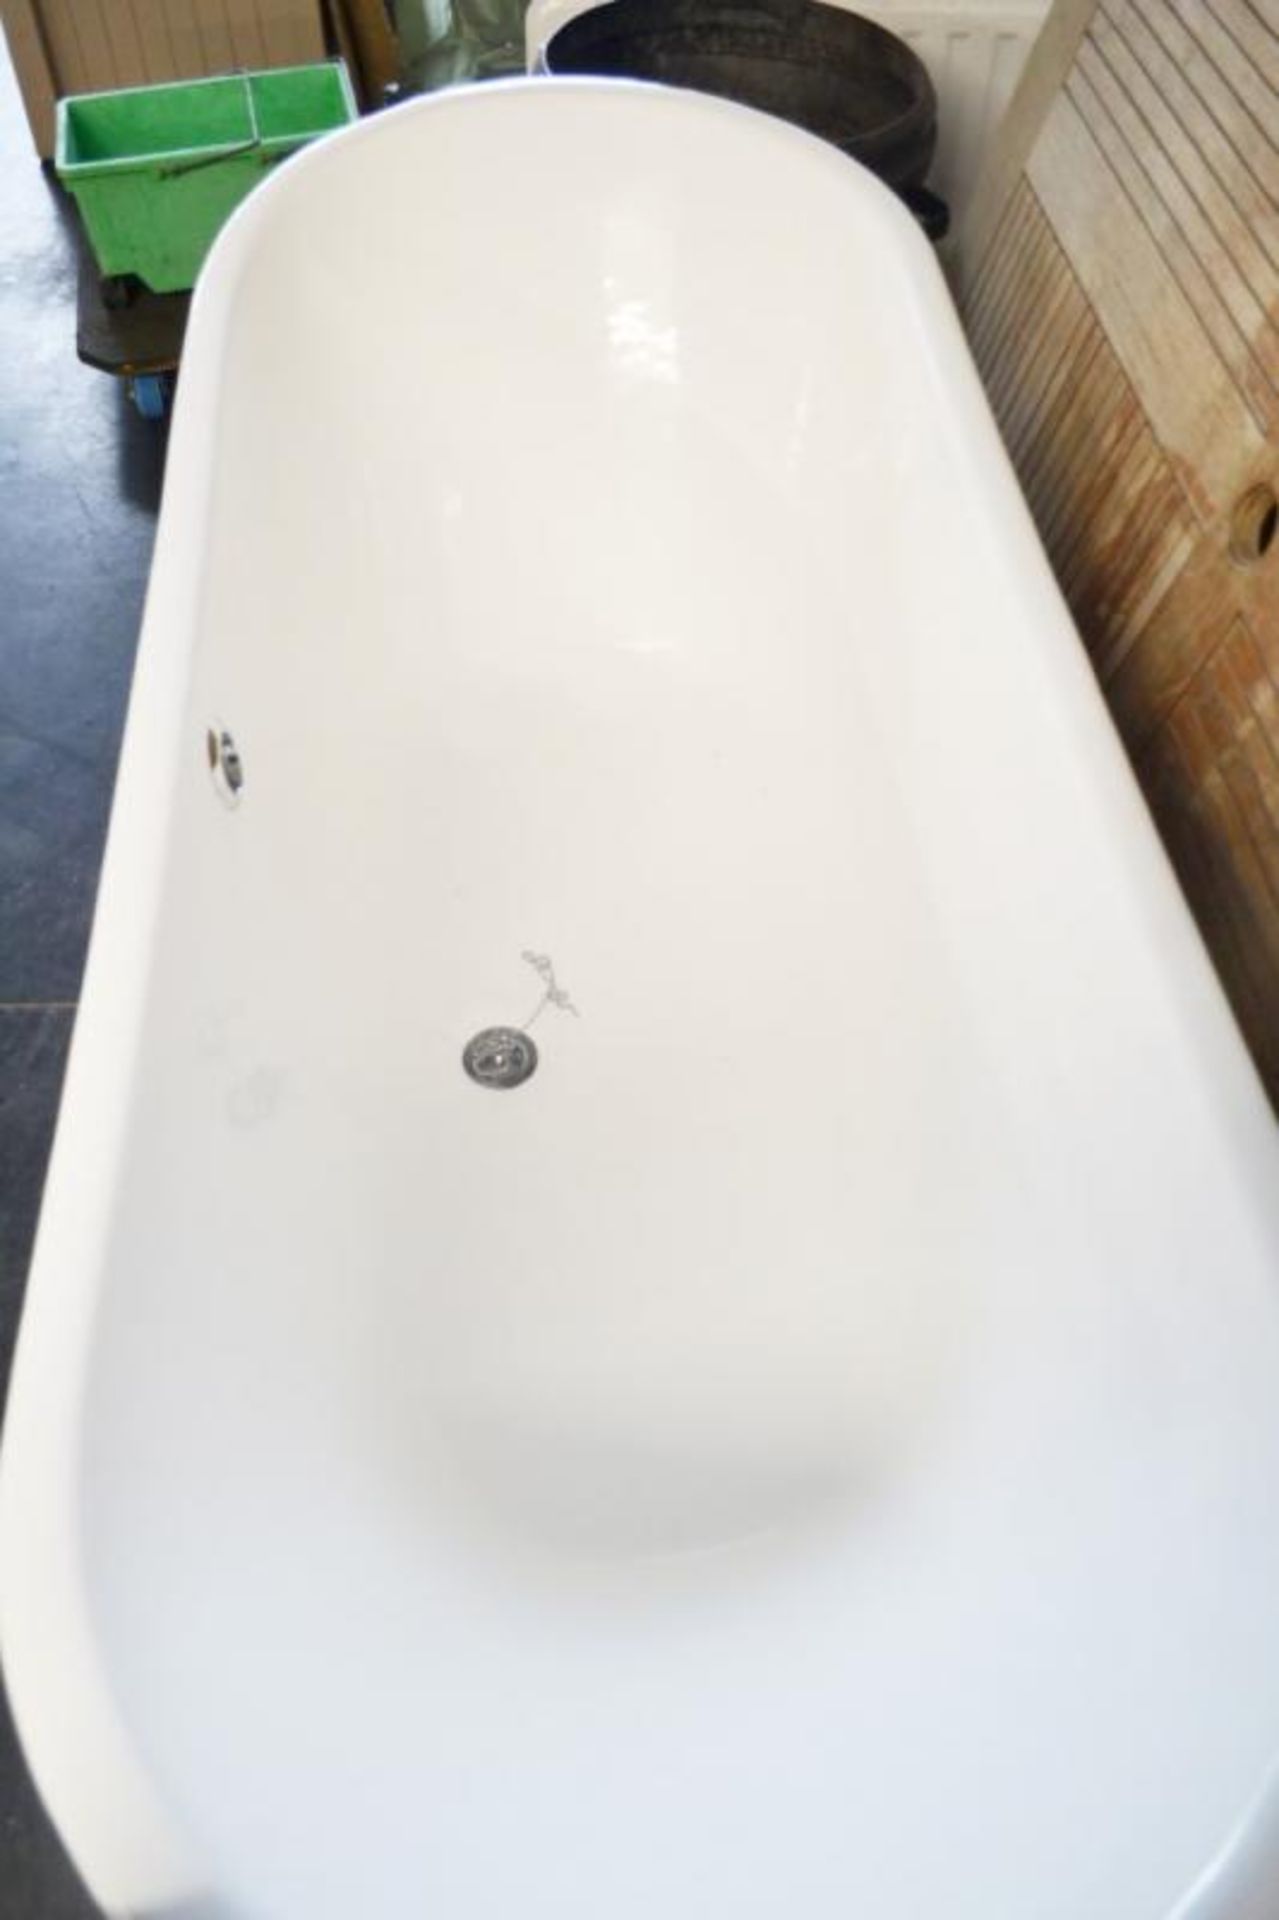 1 x Cast Iron Bath With Stainless Steel Exterior - CL439 - Location: Ilkley LS29 - Used In Good Cond - Image 3 of 8